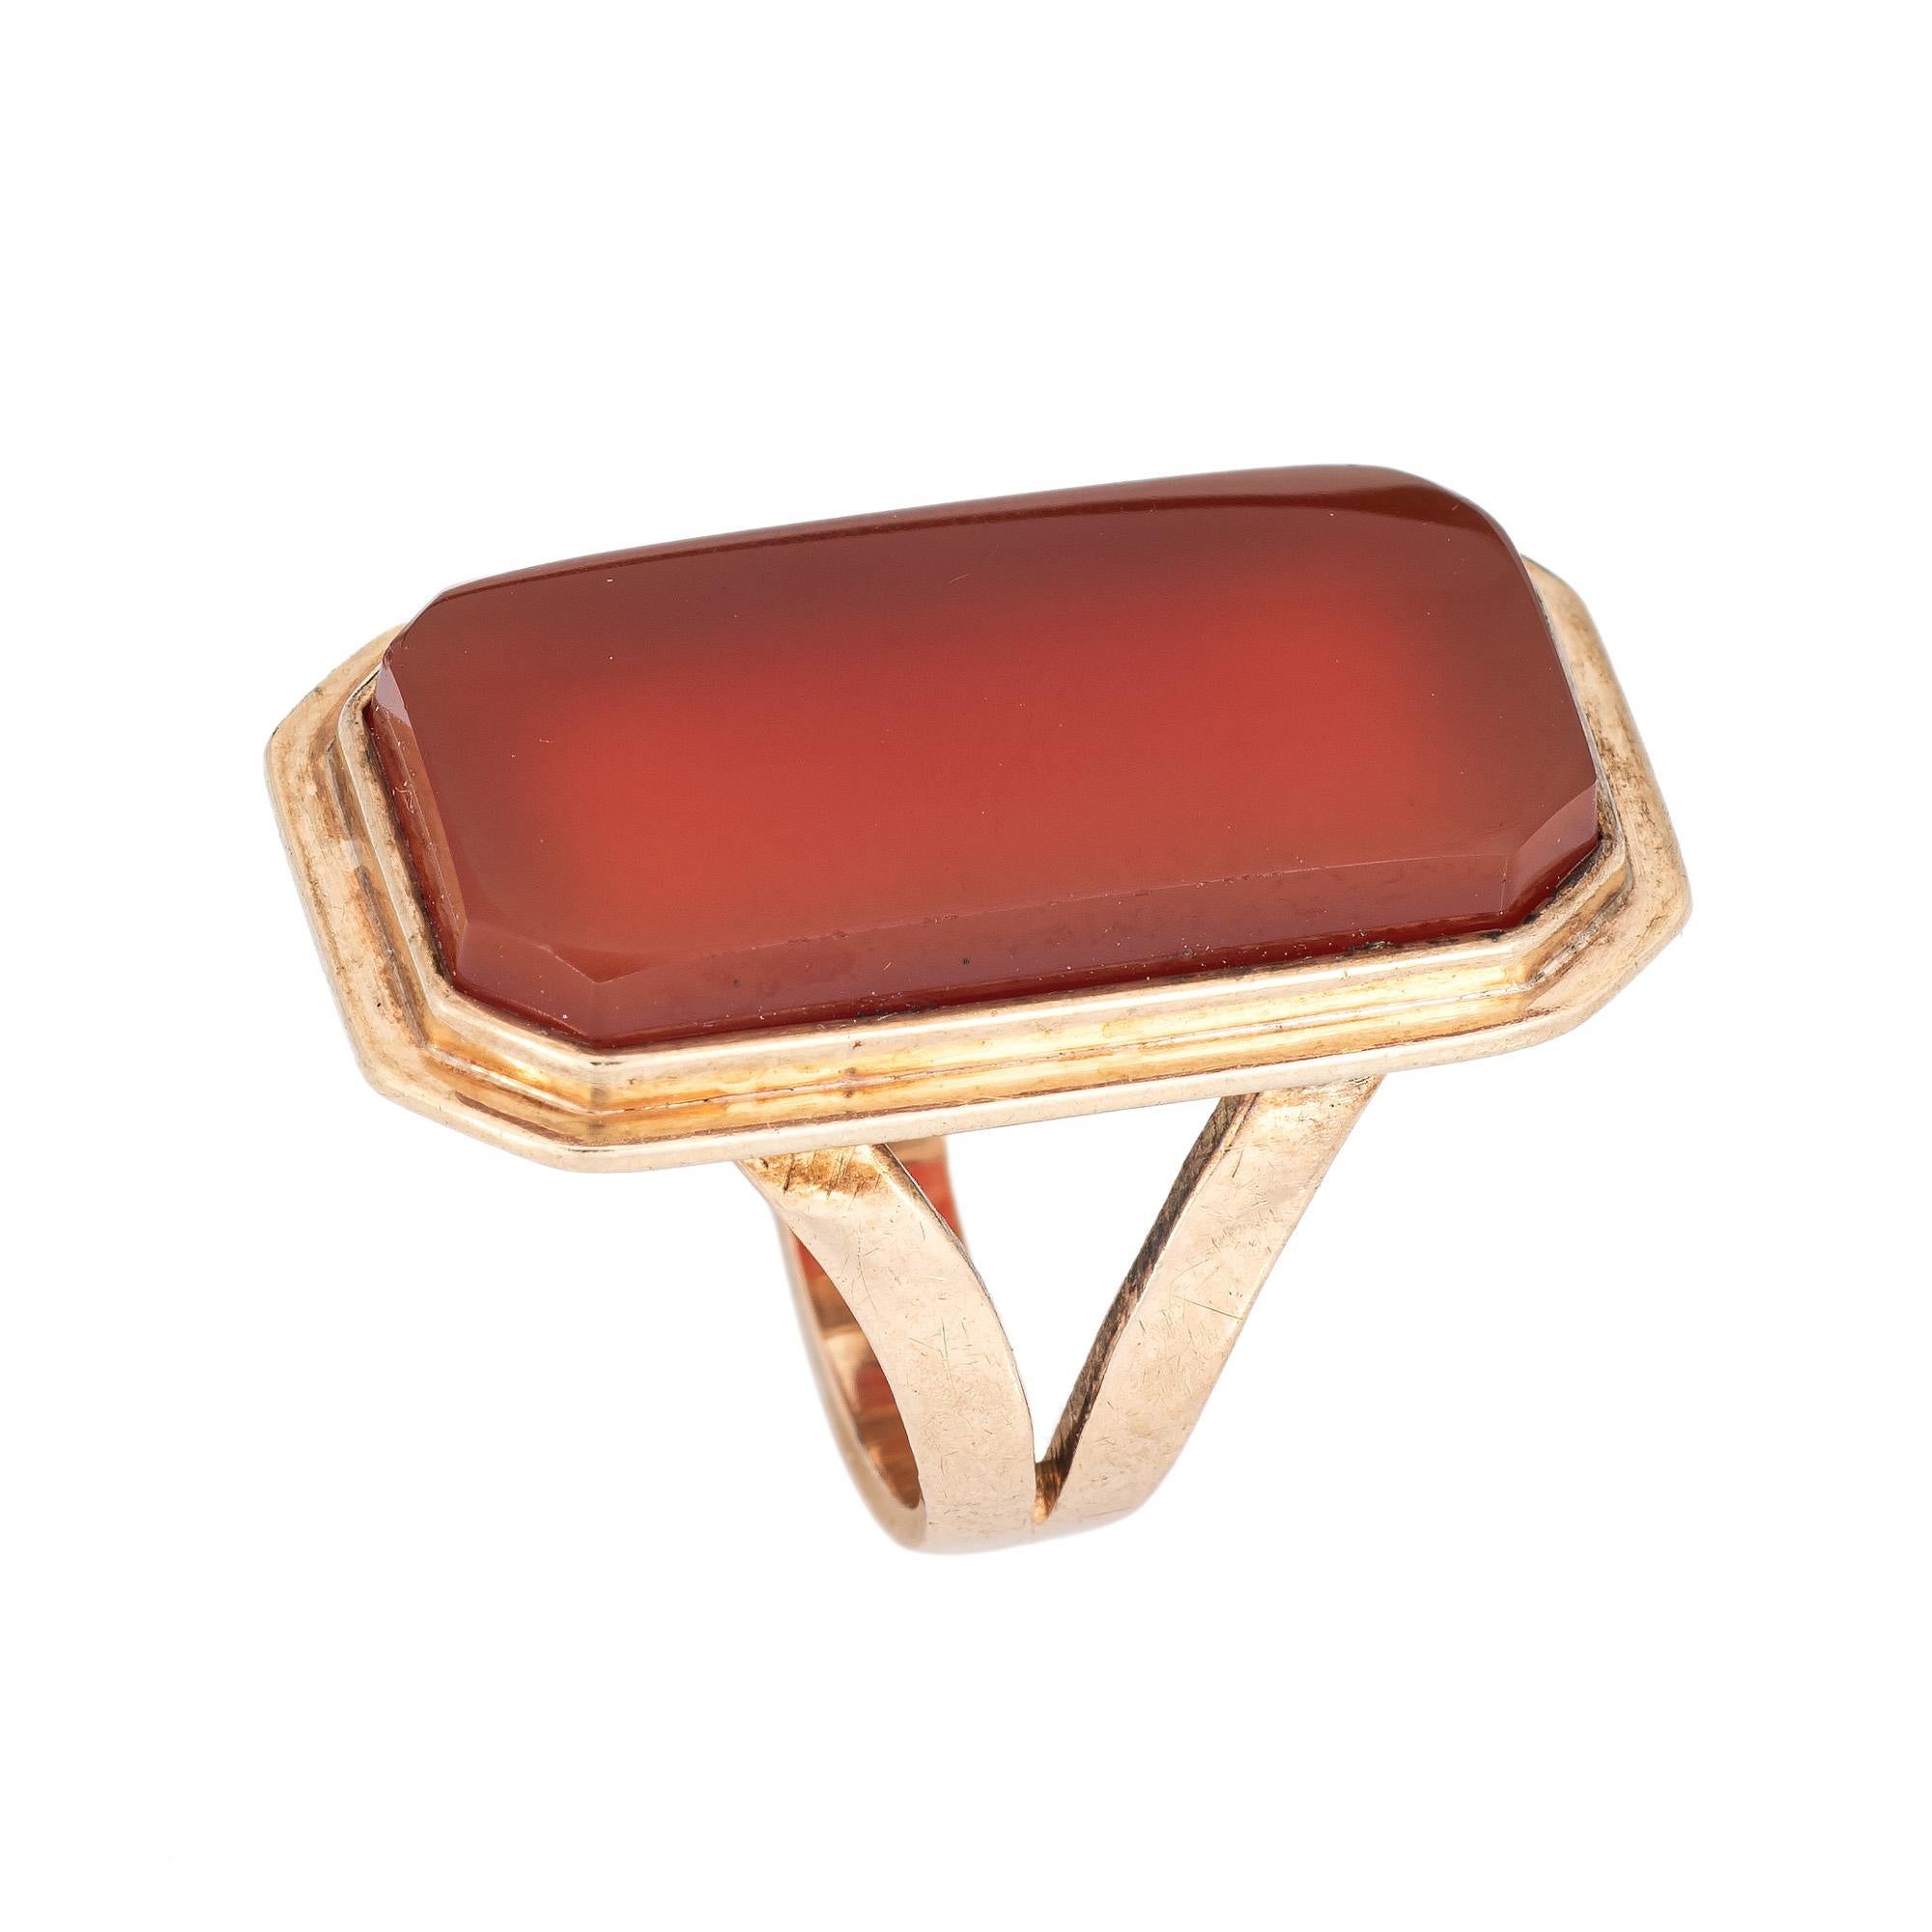 Stylish antique Victorian carnelian ring (circa 1980s to 1900s) crafted in 14 karat yellow gold. 

Carnelian measures 22mm x 11mm (estimated at 8 carats). The carnelian is in good condition with a few light surface abrasions visible under a 10x